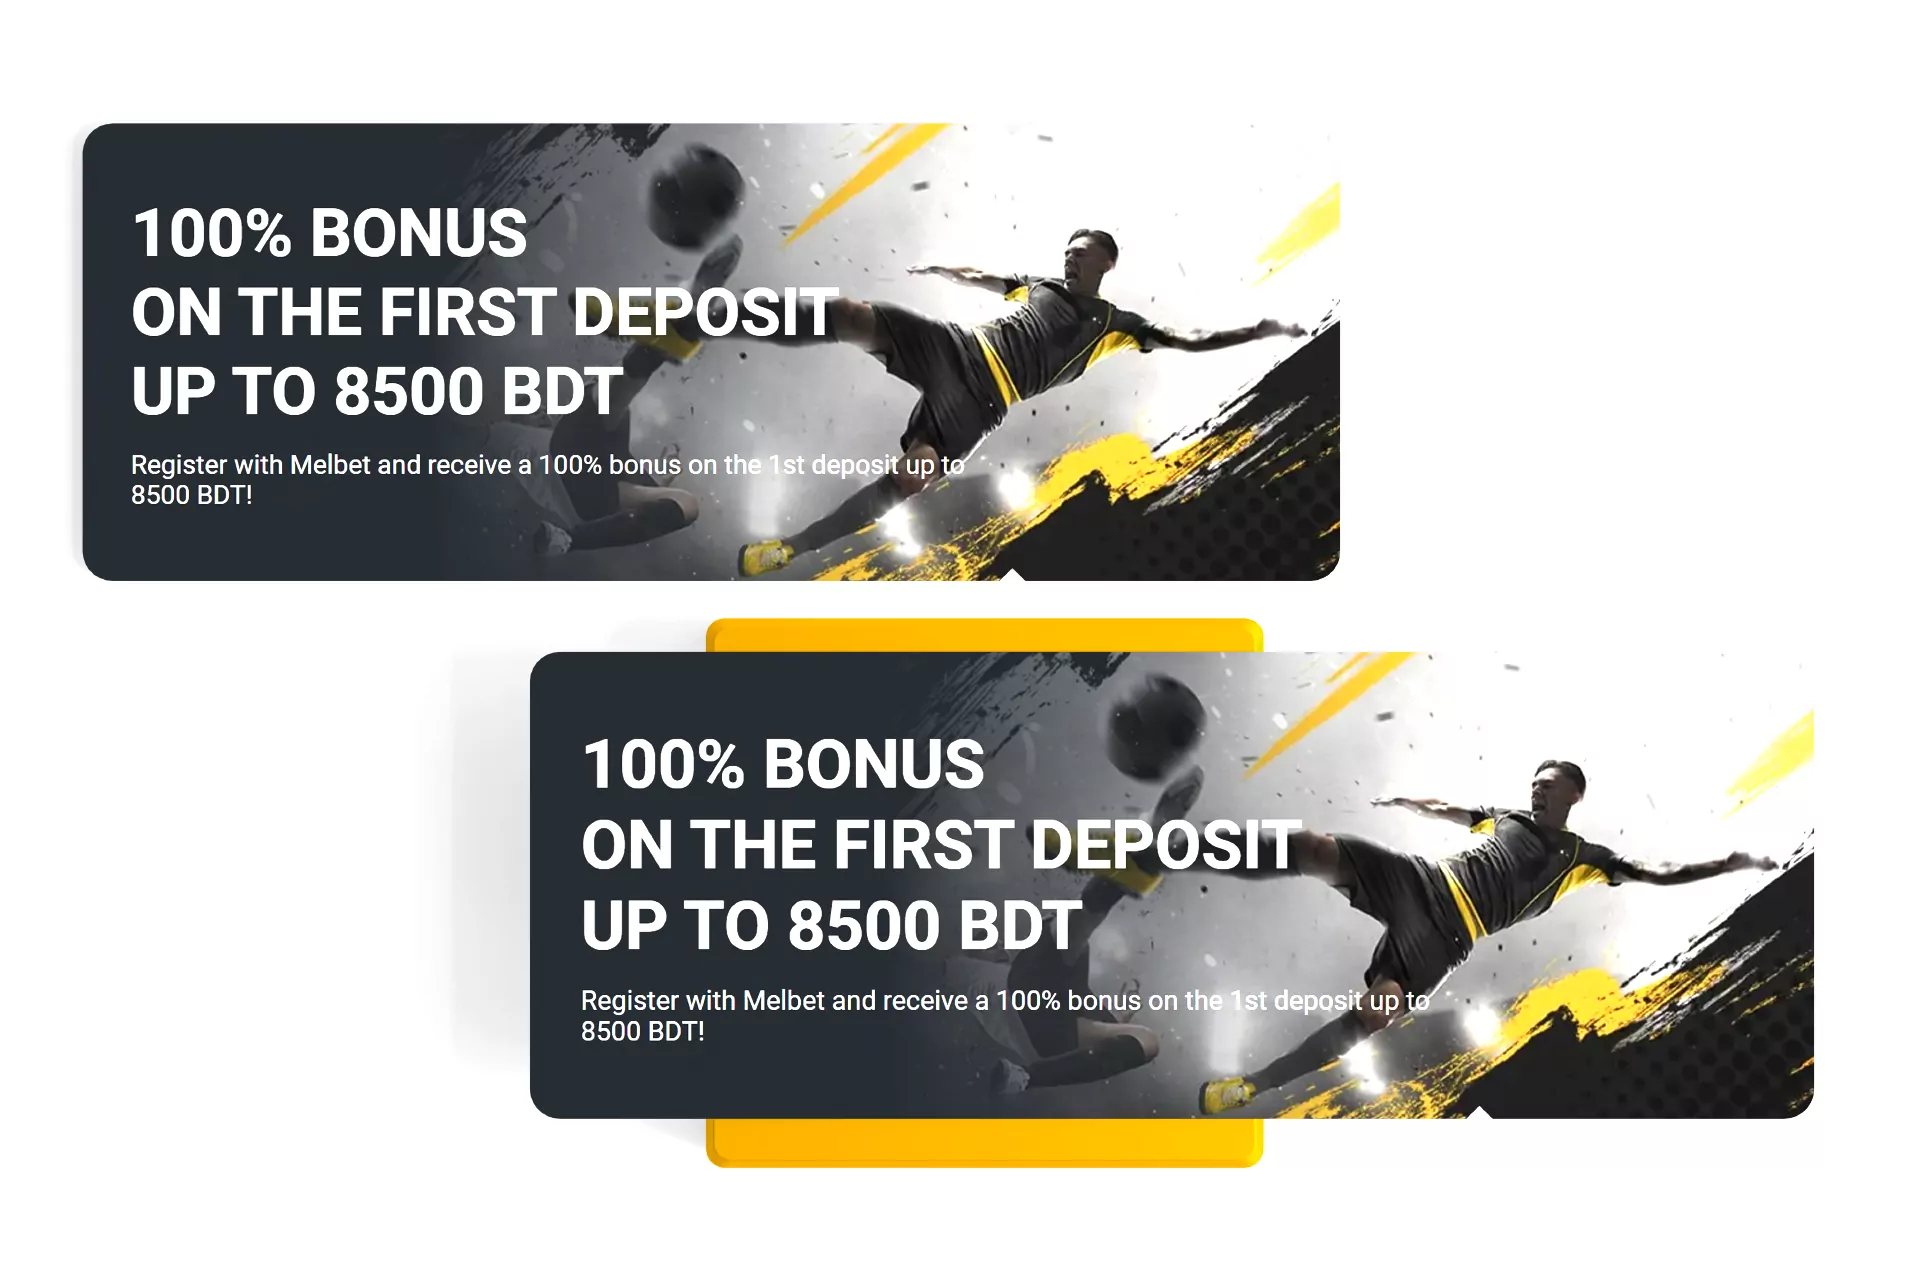 Bettors can get a special bonus from the bookmaker on their first deposit at Melbet.